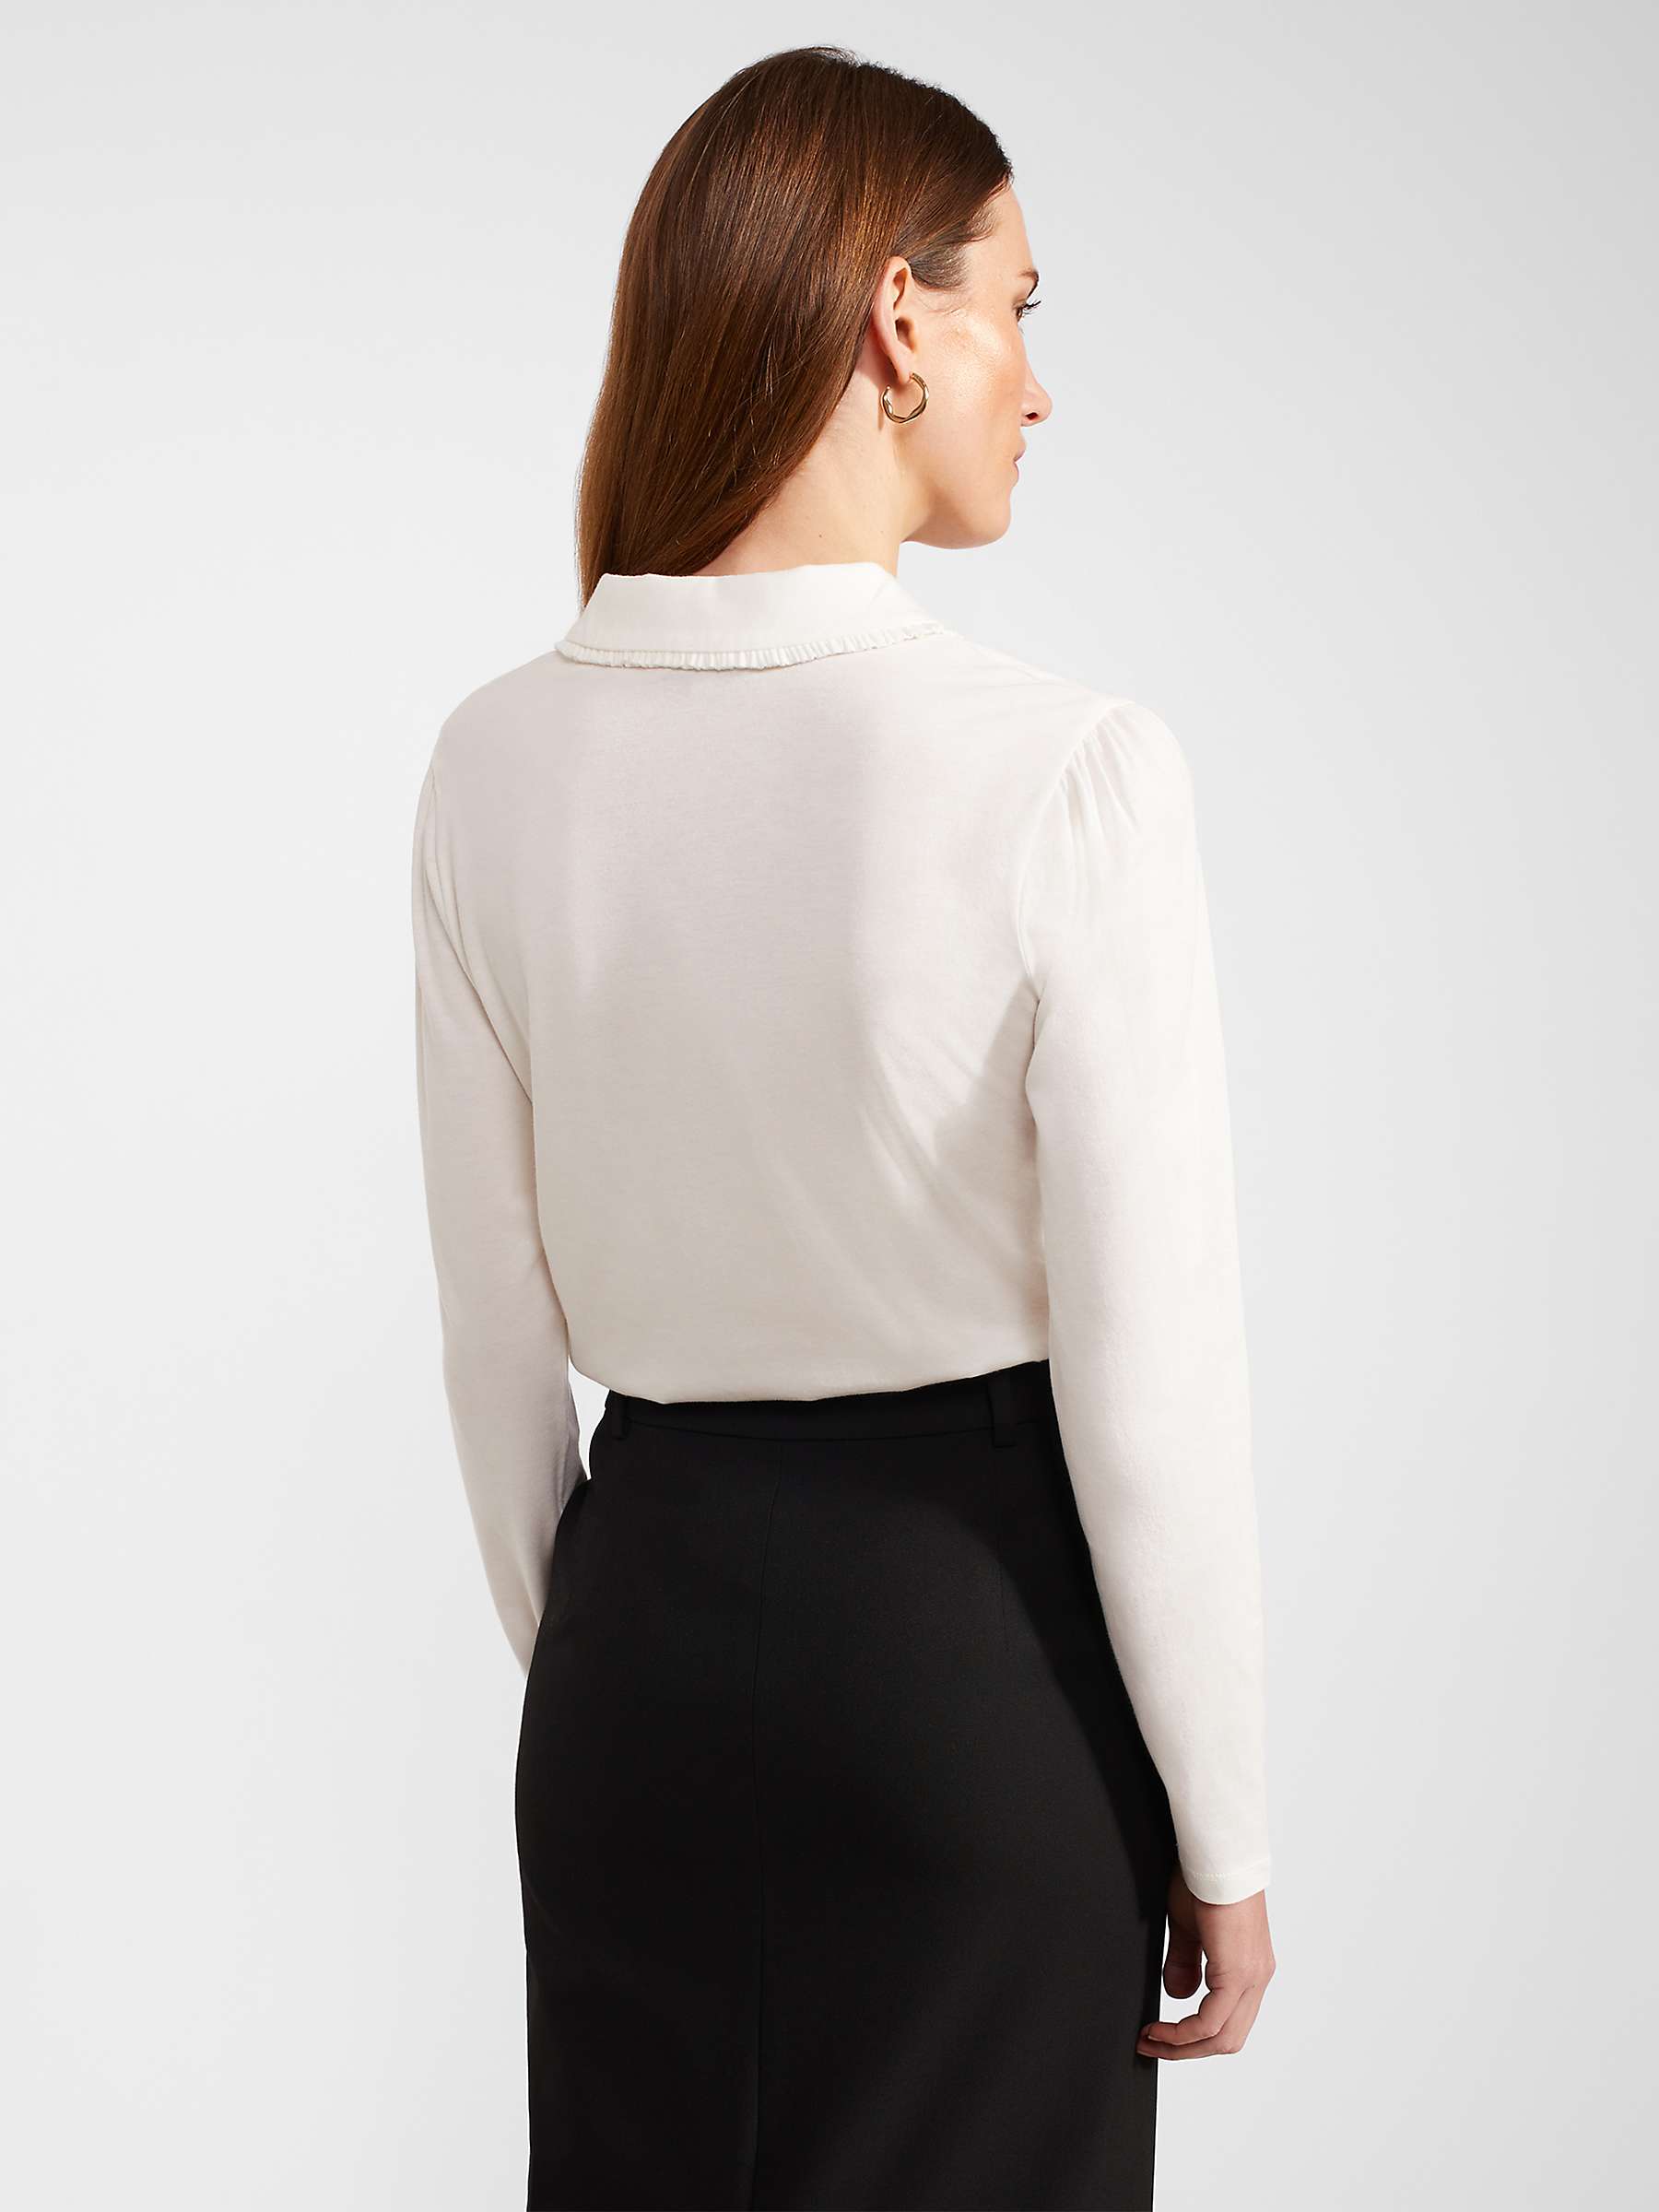 Buy Hobbs Philippa Collared Blouse, Ivory Online at johnlewis.com